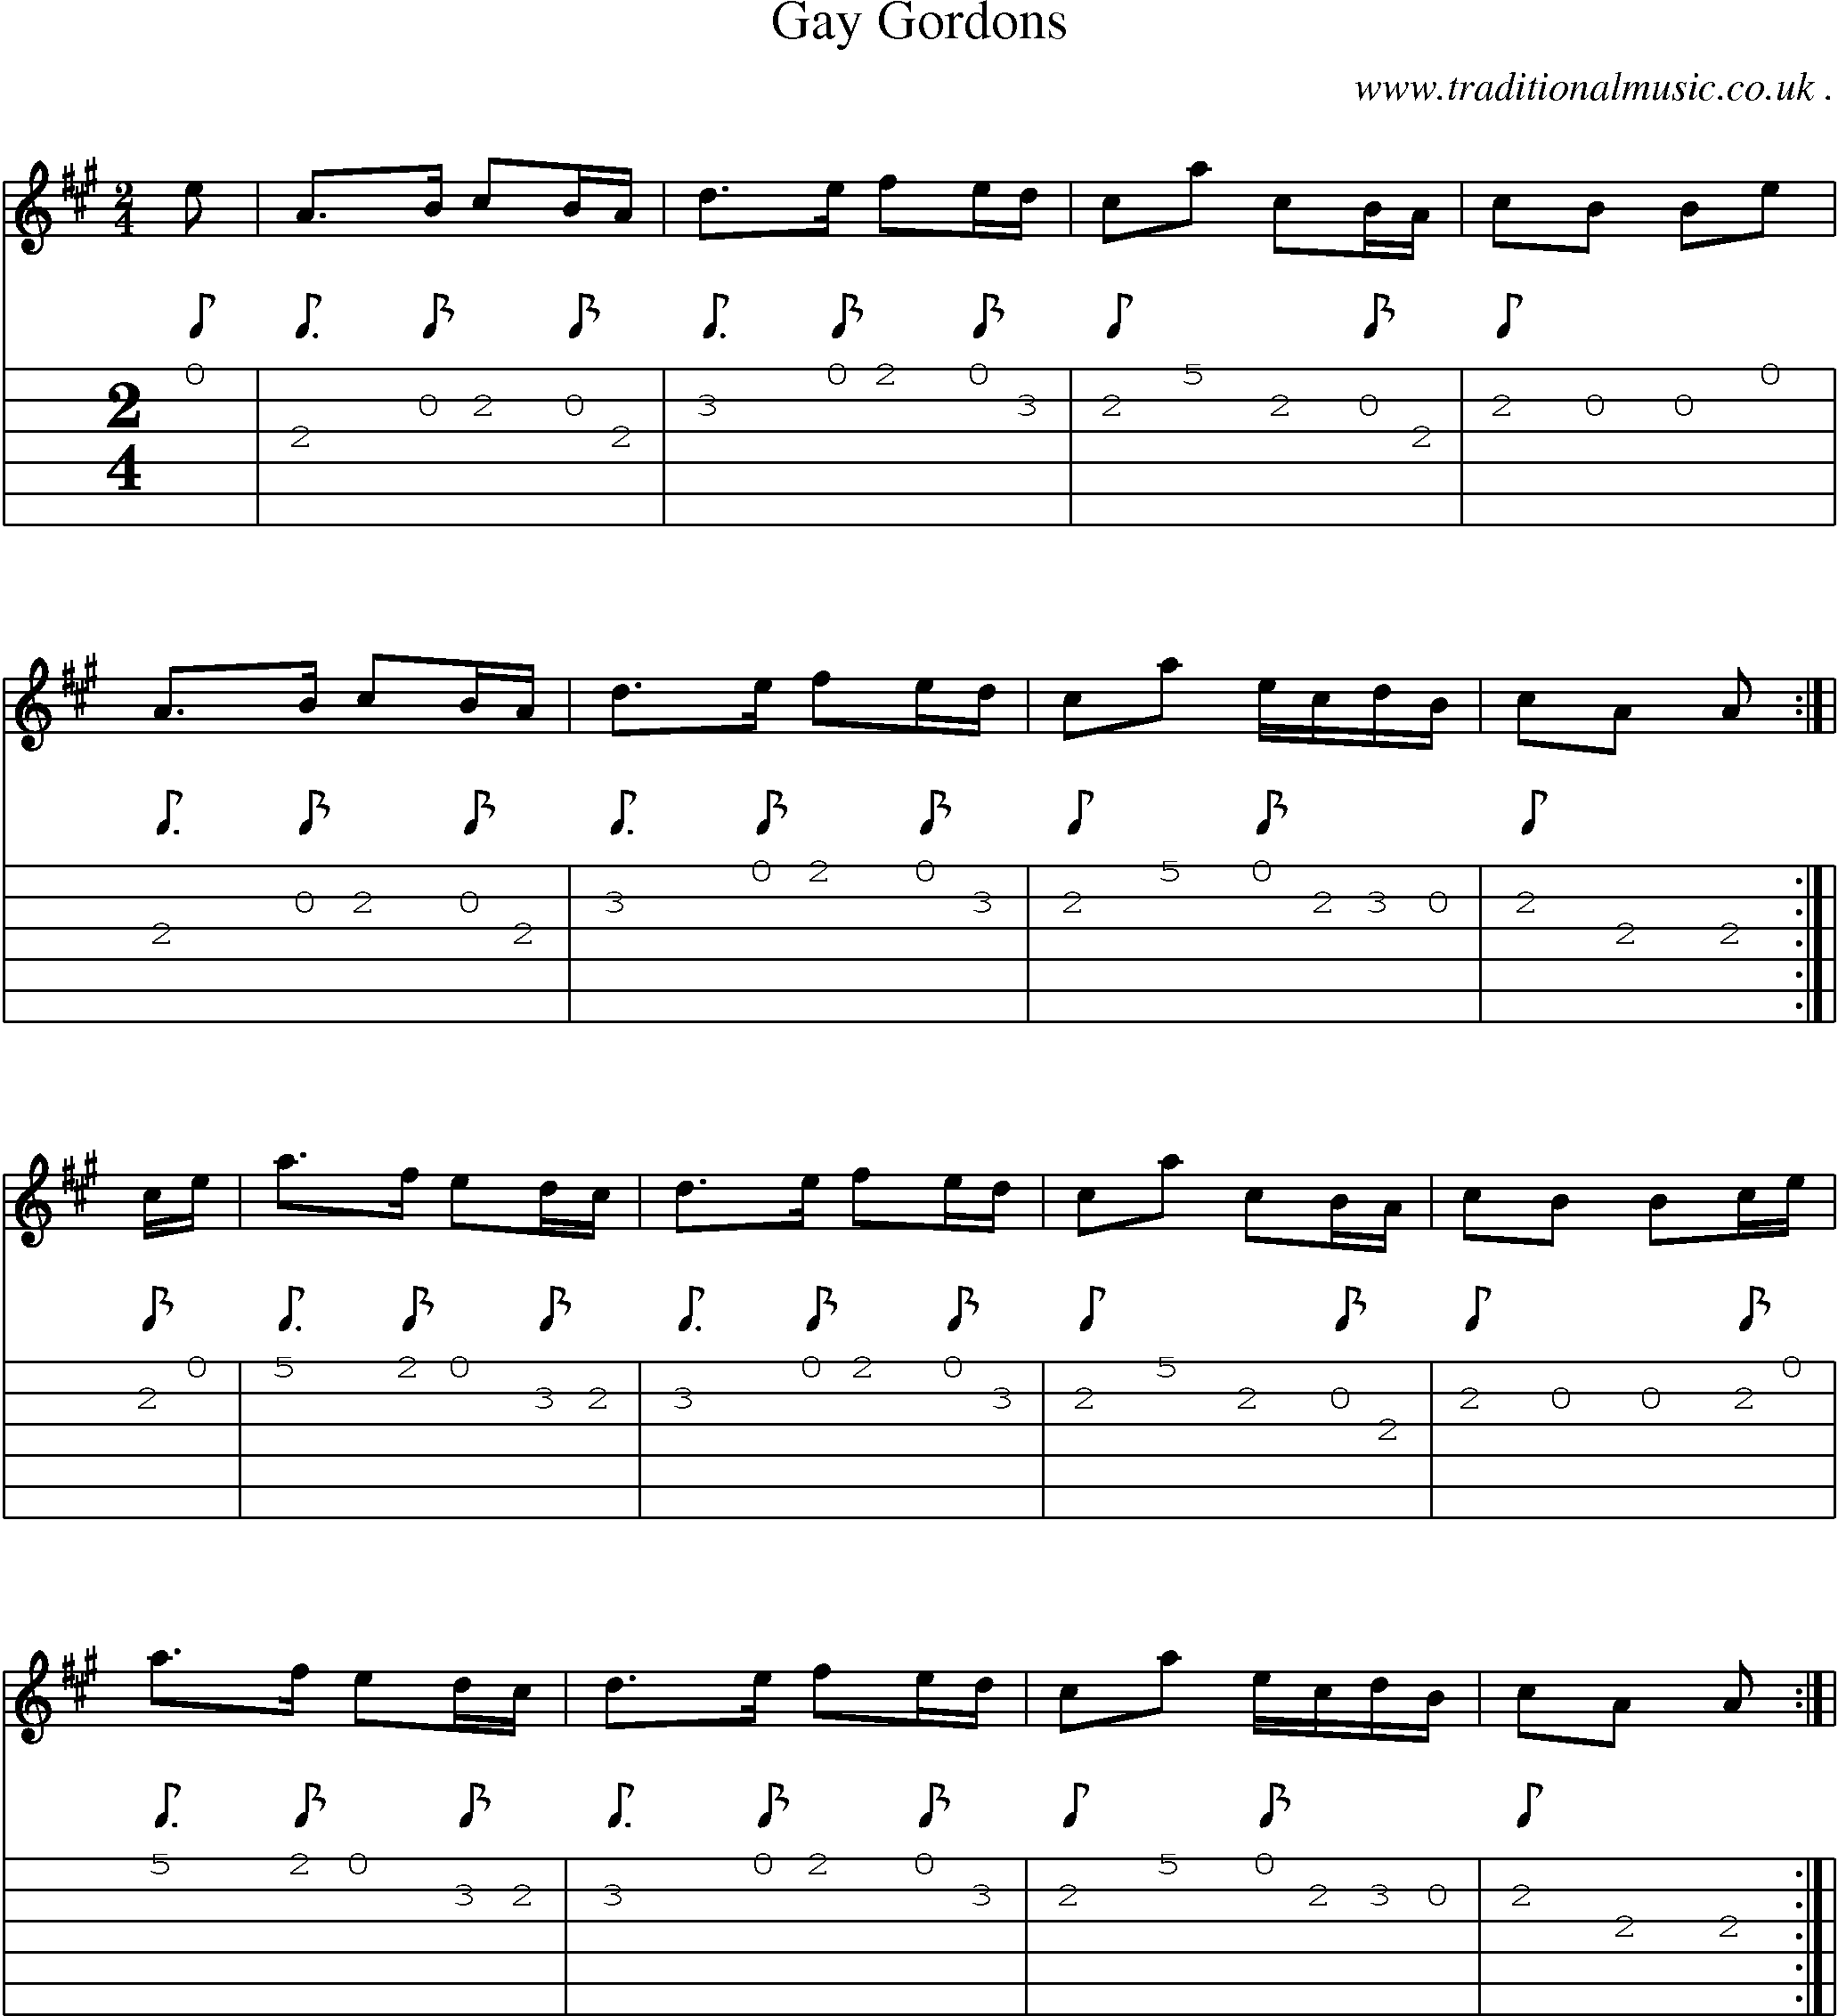 Sheet-Music and Guitar Tabs for Gay Gordons